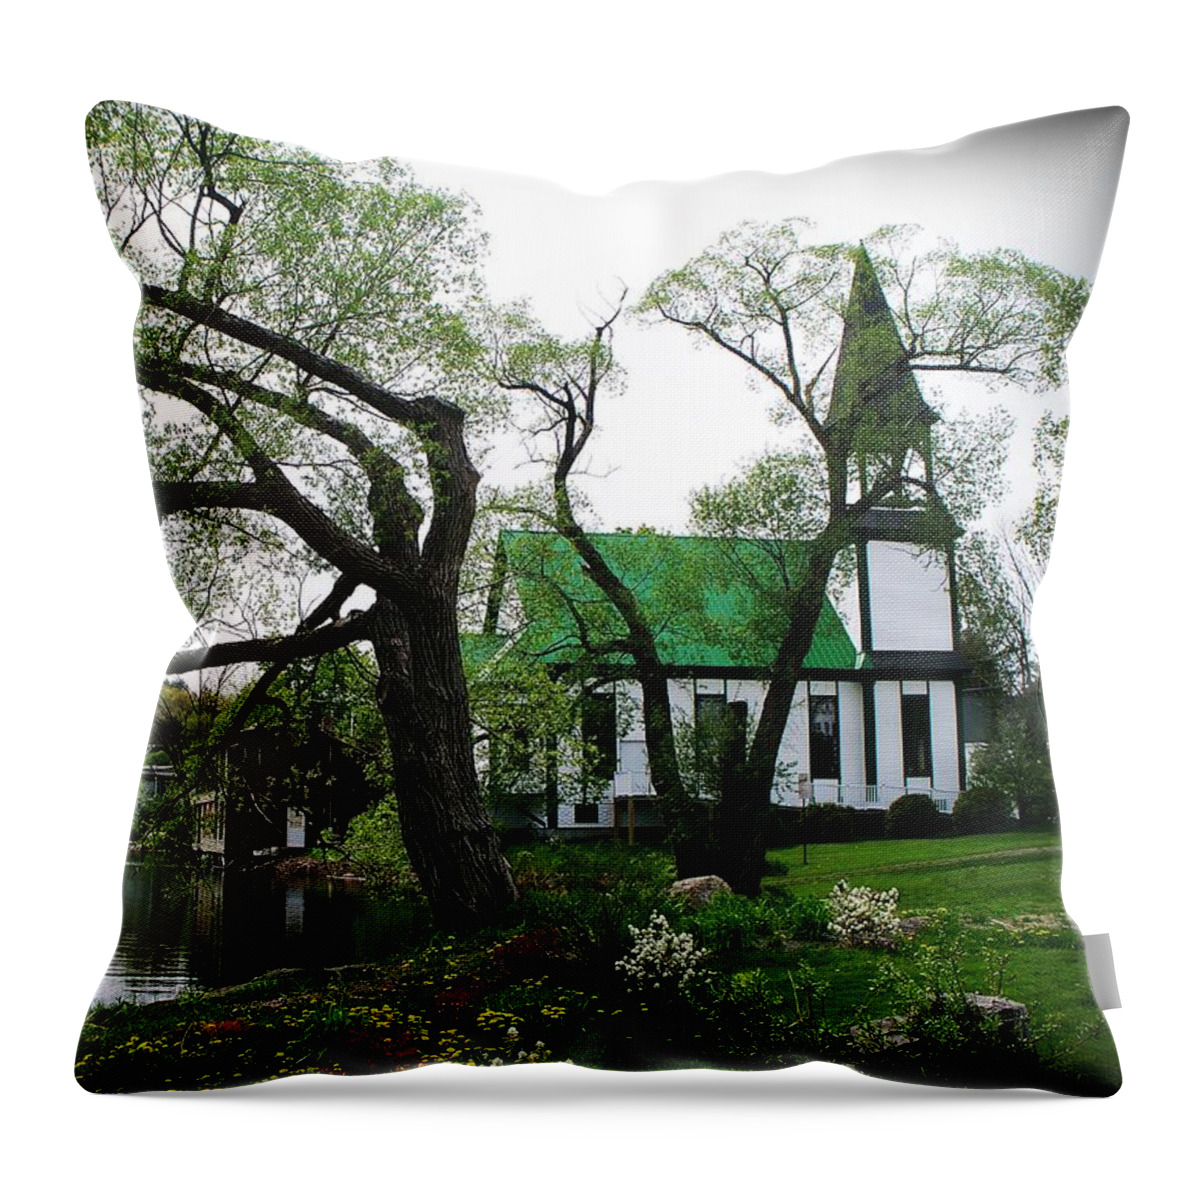 Landscape Throw Pillow featuring the photograph Minnehonk View by Joy Nichols